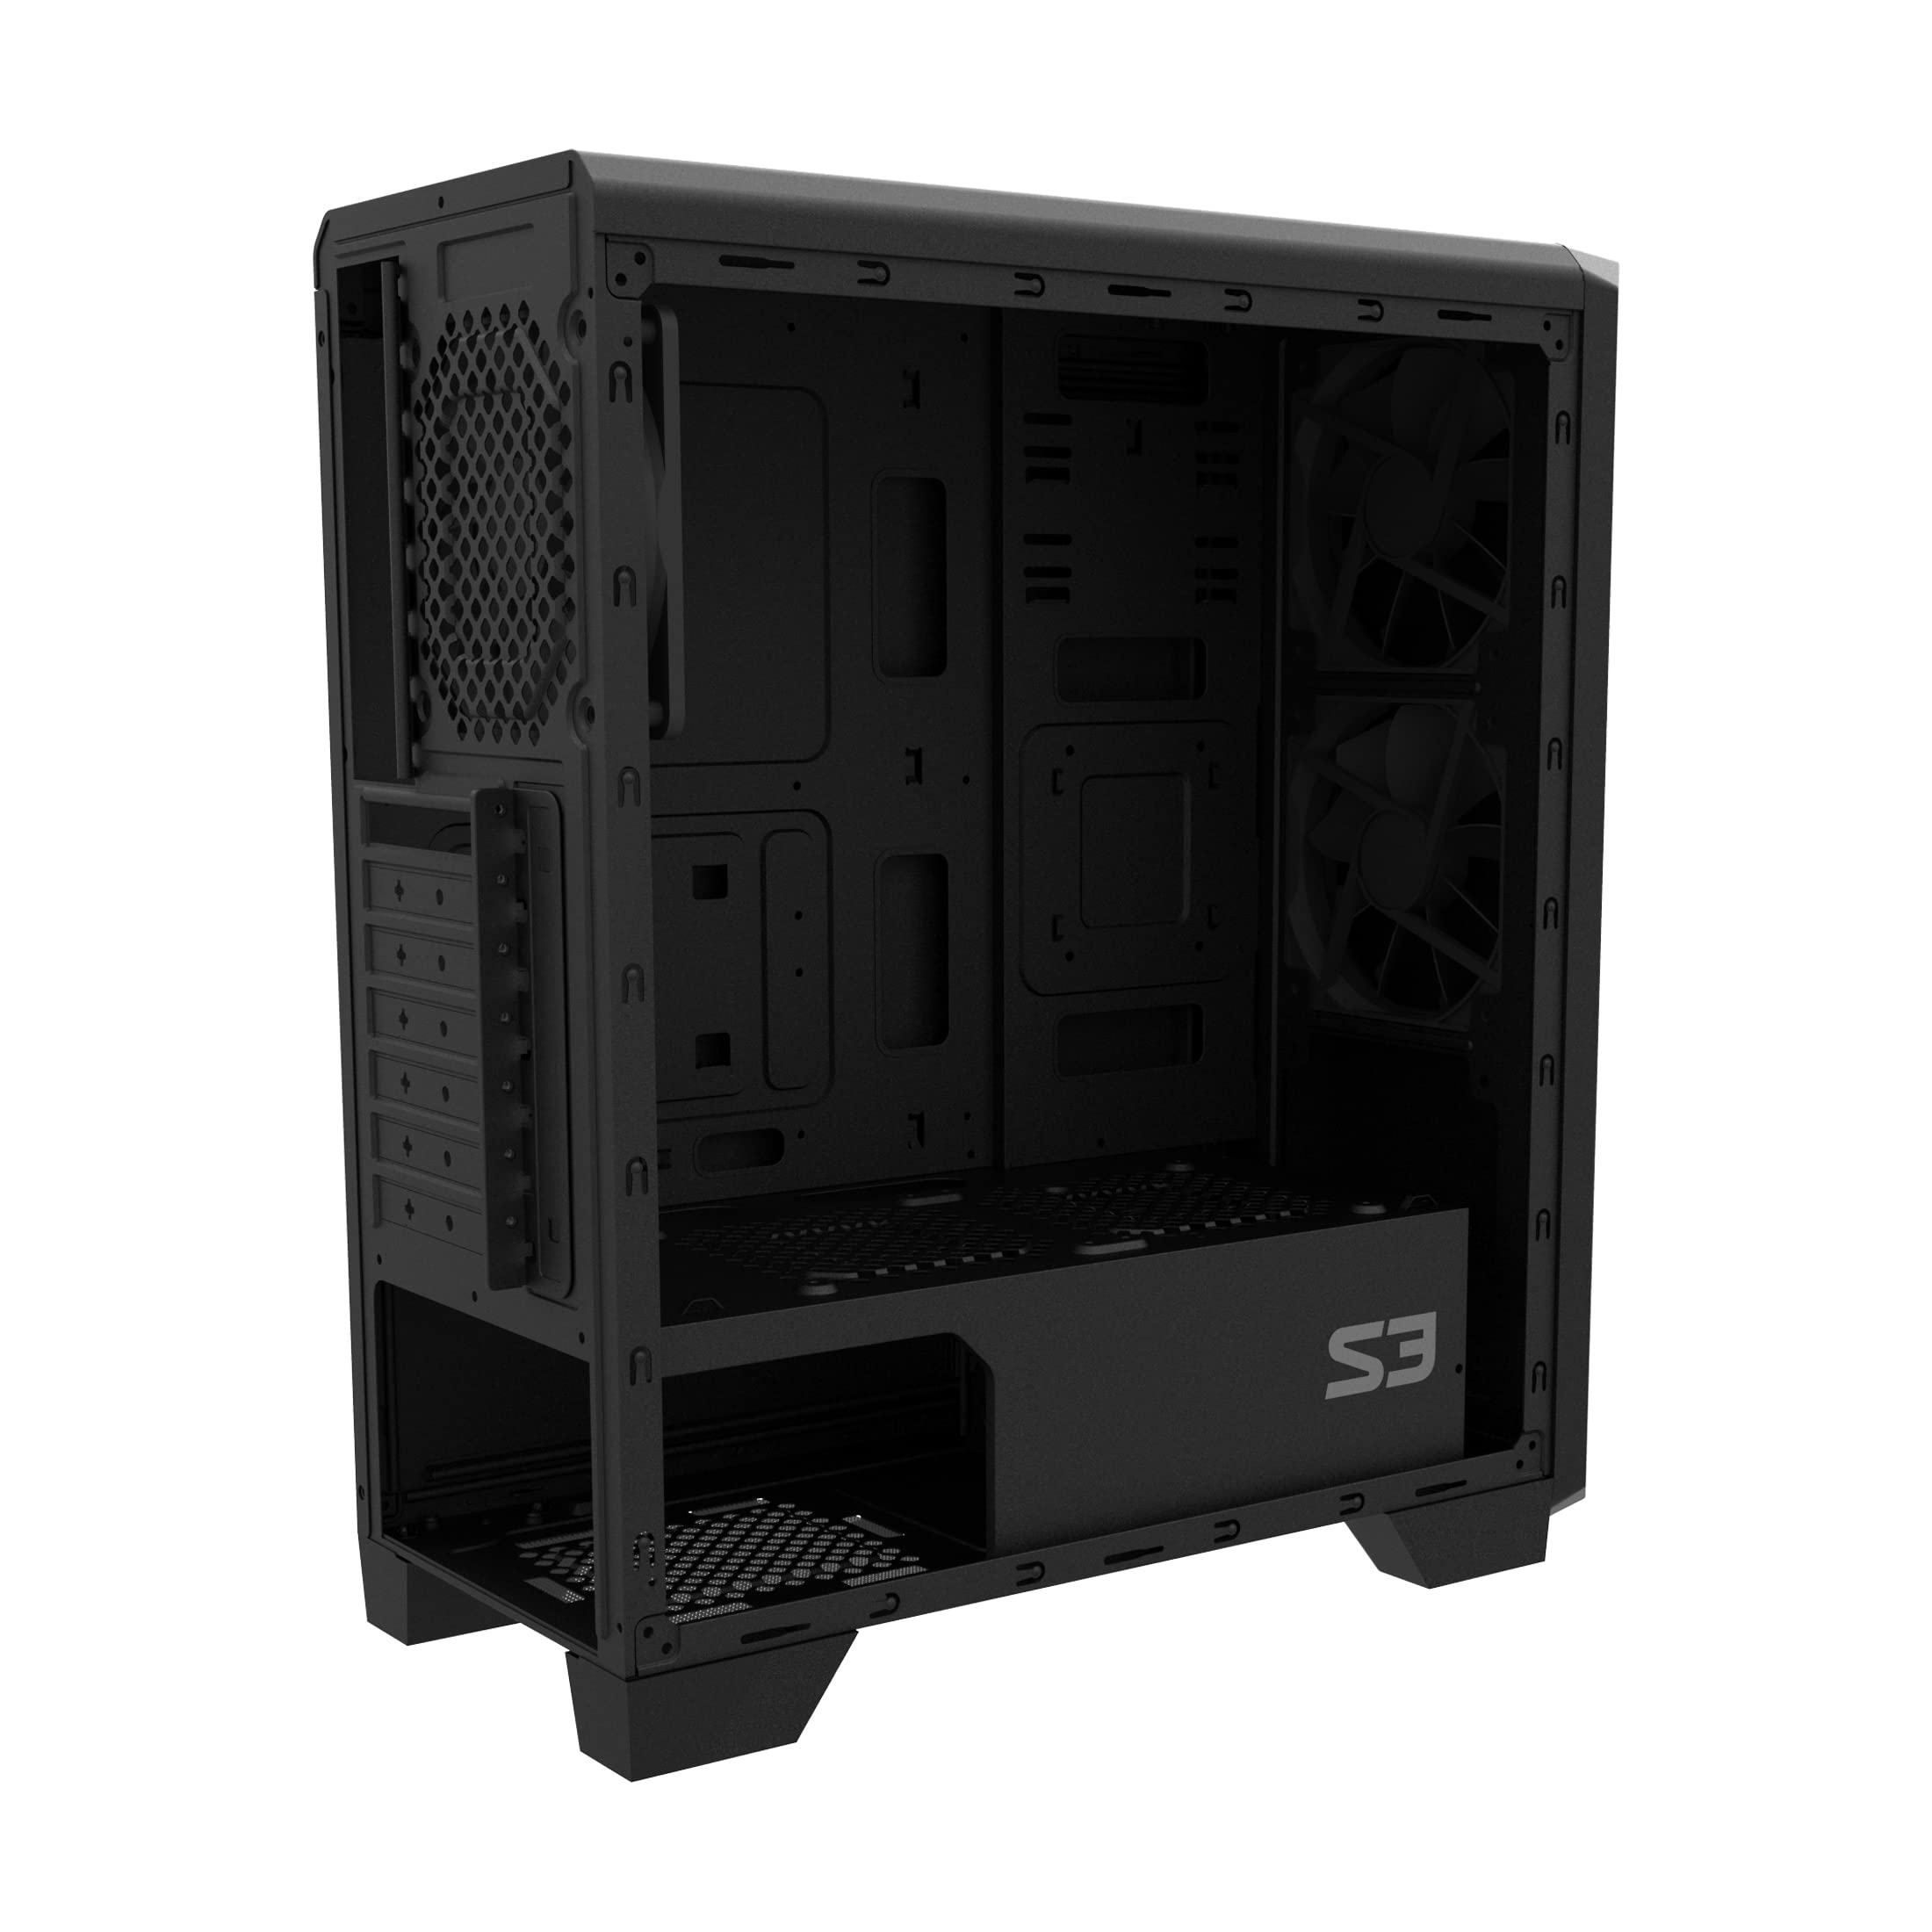 Zalman S3 ATX Mid Tower Computer PC Case, Gaming Workstation MATX ITX Case, 3X Preinstalled 120mm Fans, Full Acrylic Side Panel & Front Side Air Holes (Acrylic - 3 Fan)